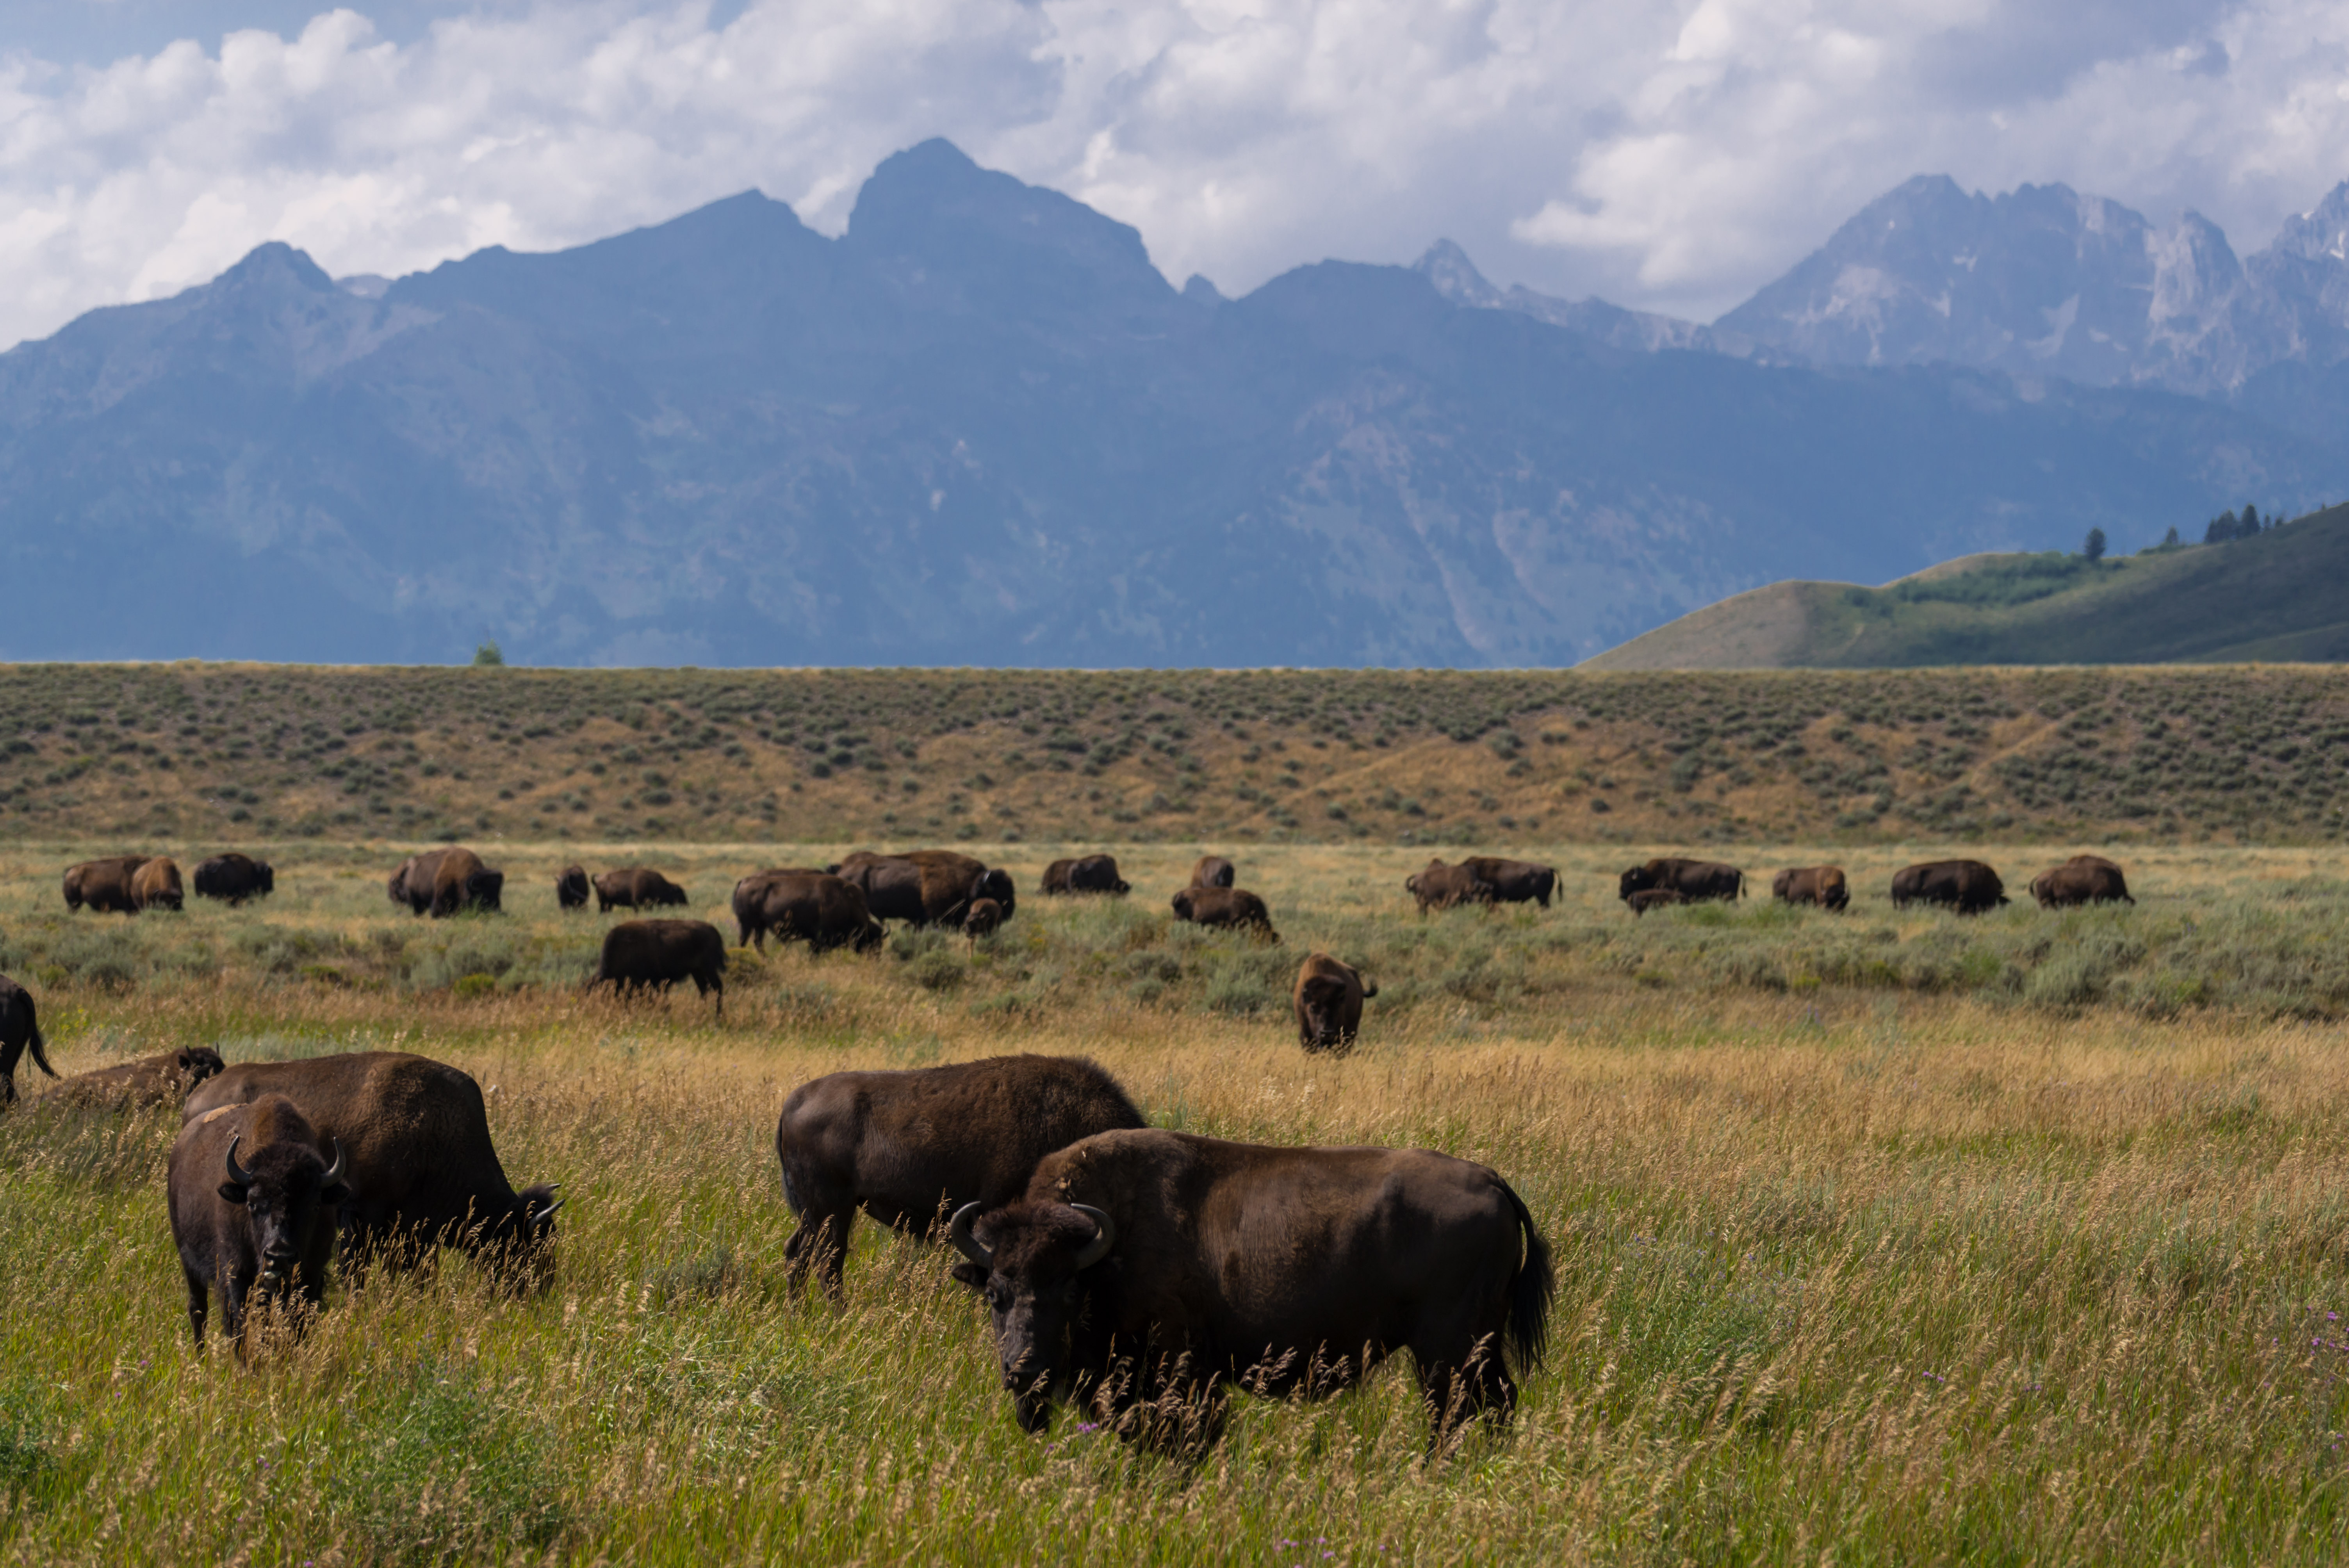 A herd of buffalo in the field in front of the Grand Teton National Park area in Wyoming. – Luxury Jackson Hole